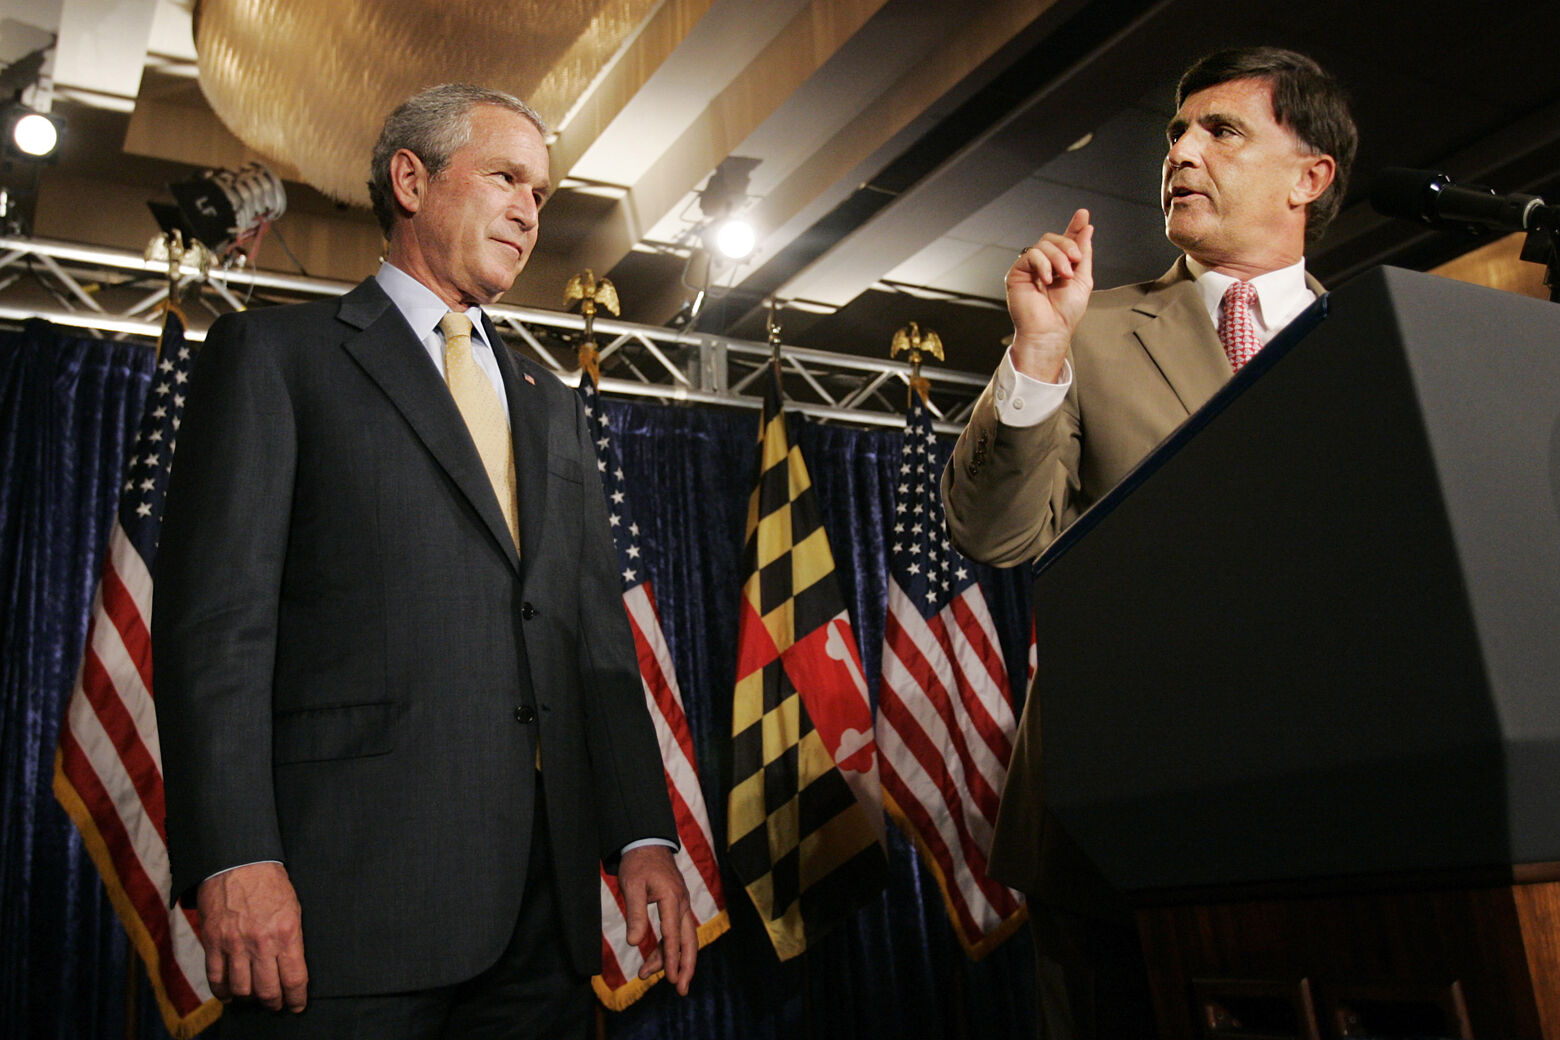 <p>In 2004, Maryland Gov. Robert L. Ehrlich Jr., right, was governor and George W. Bush was president. In this 2006 photo, Ehrlich introduces Bush at the Maryland Victory 2006 Reception, Wednesday, May 31, 2006, in Baltimore. (AP Photo/Manuel Balce Ceneta)</p>
